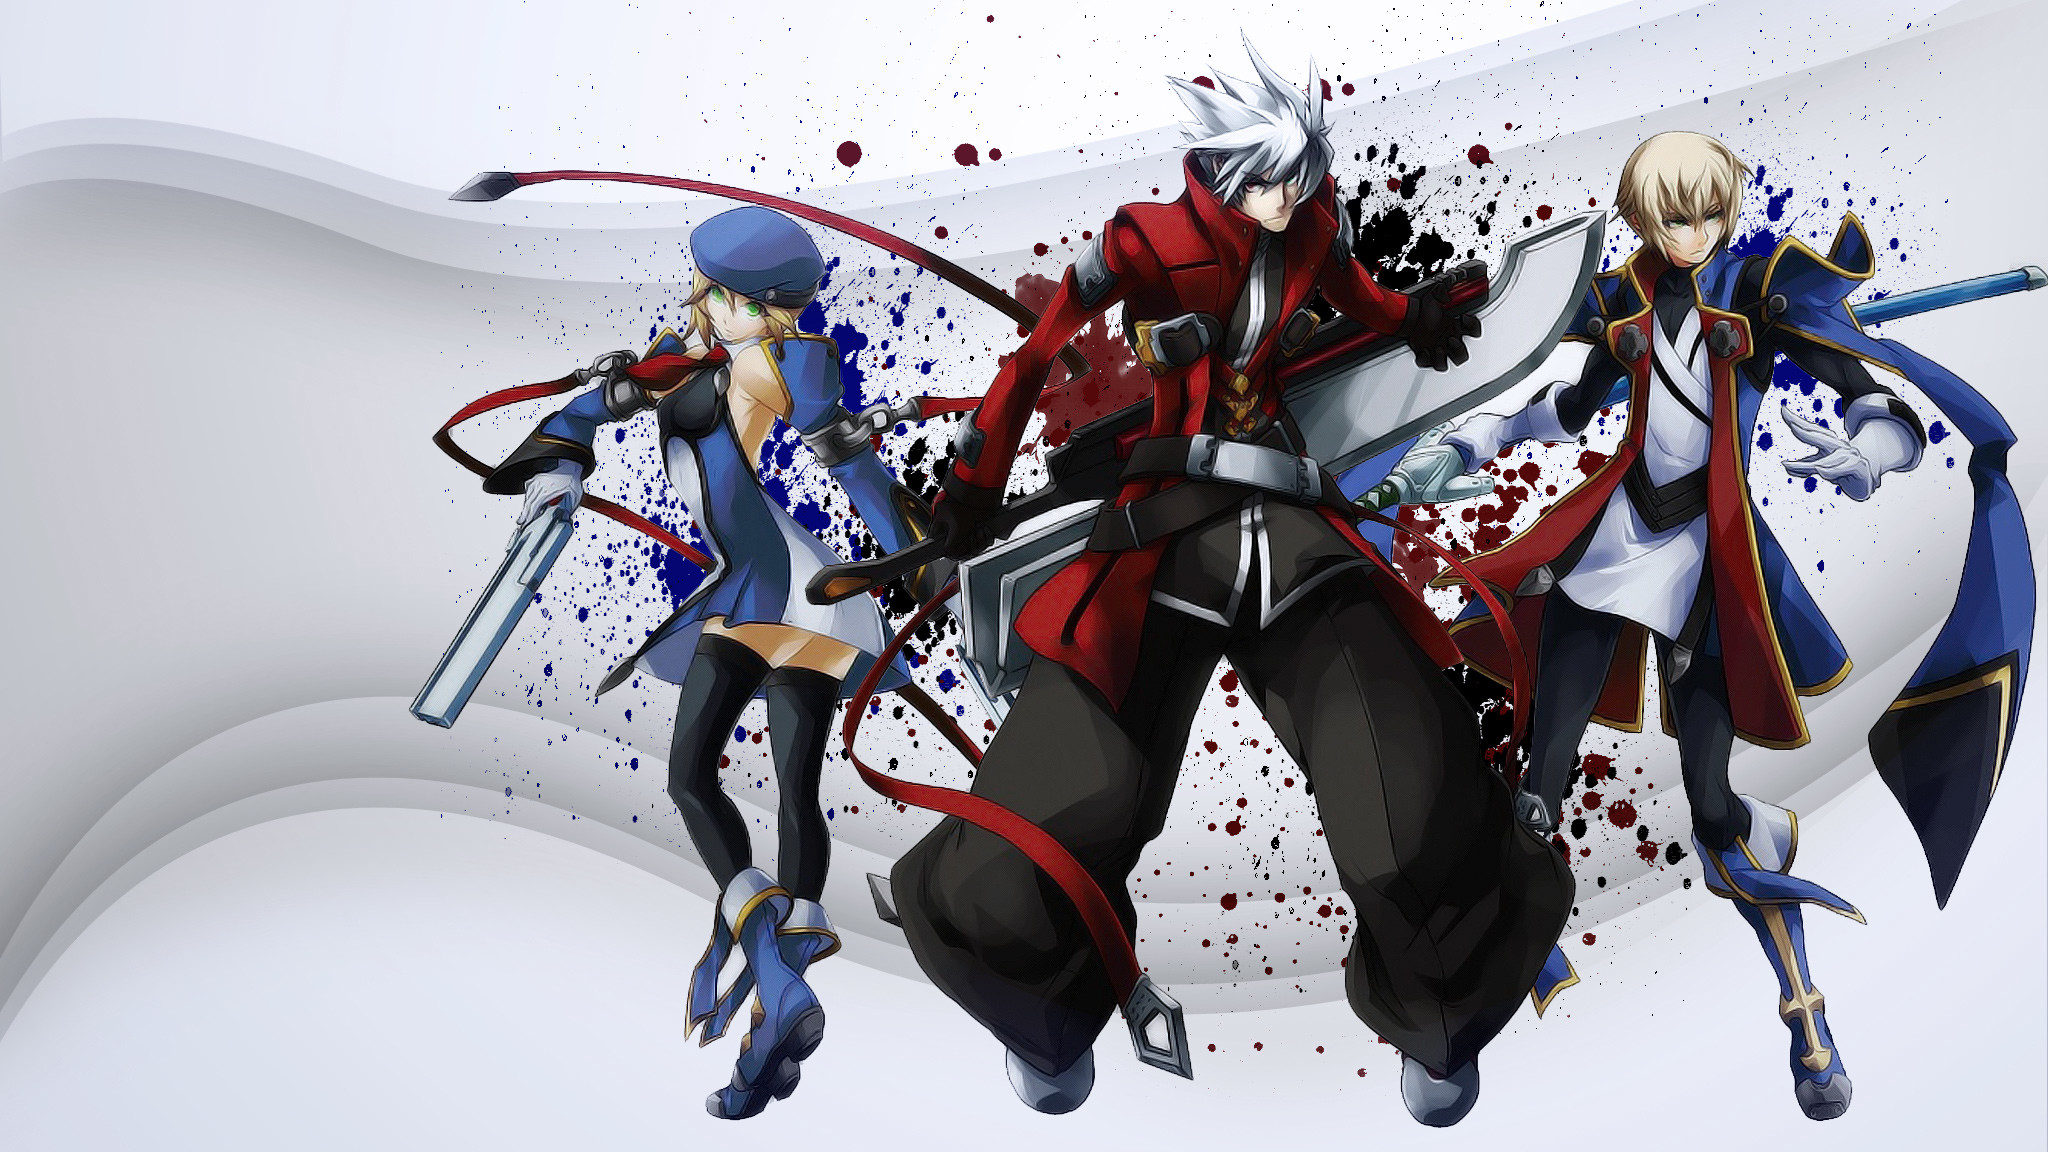 2048x1152 you are viewing blazblue ragna the blood edge hd wallpaper color